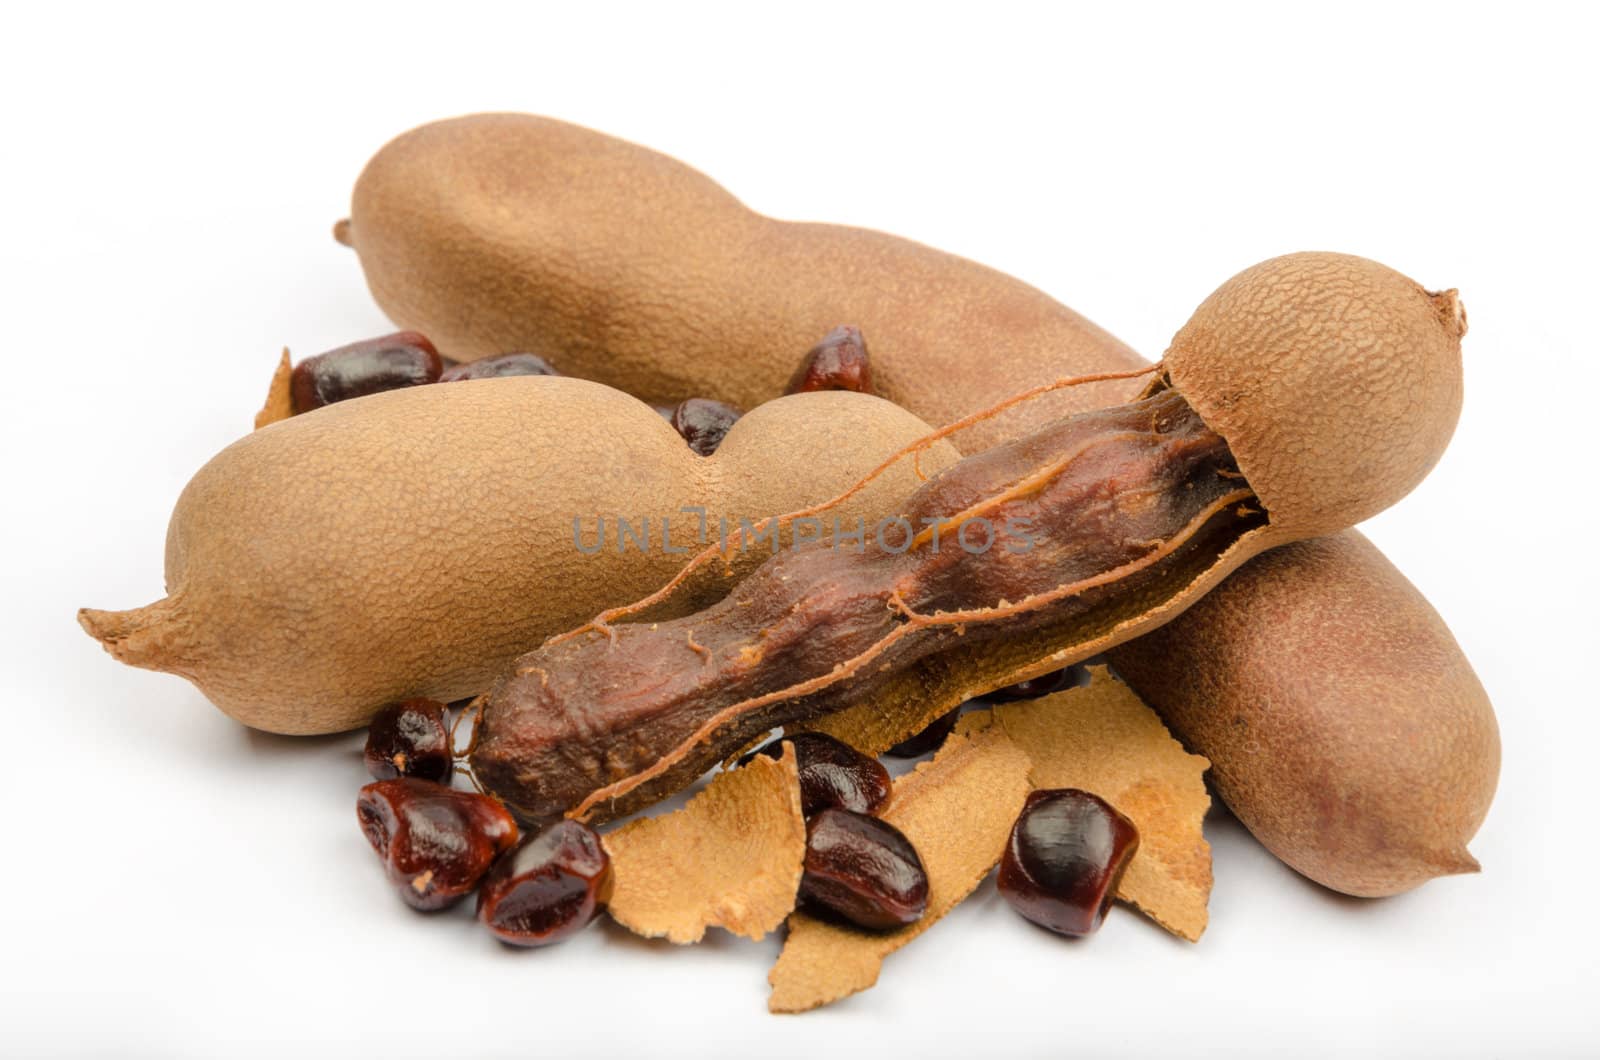 Tamarind is a popular spice in many parts of the world